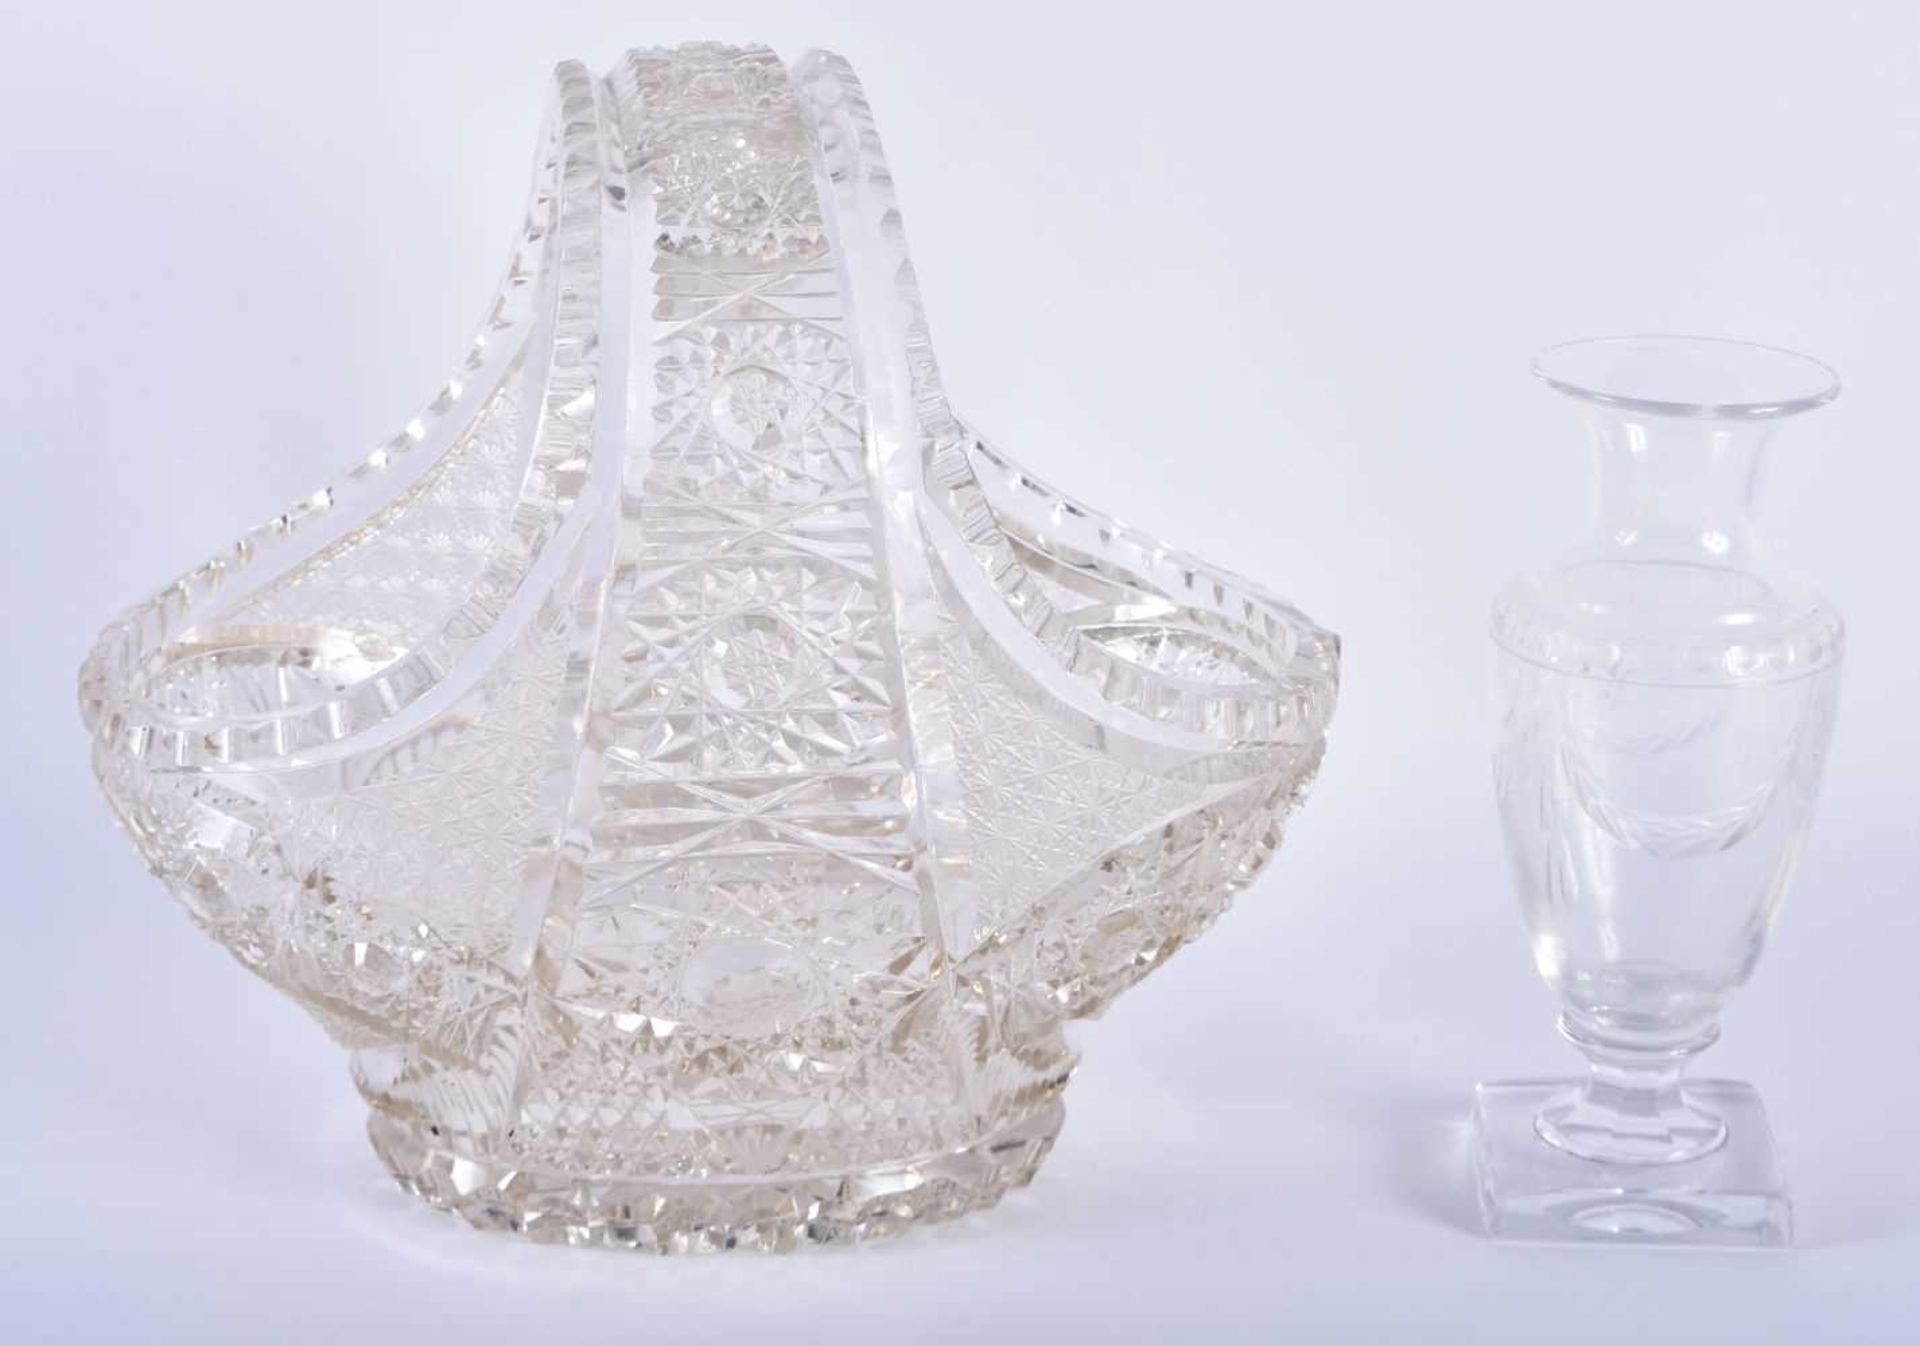 A FINE ANTIQUE CUT GLASS BASKET together with an antique English neo classical glass vase. Largest